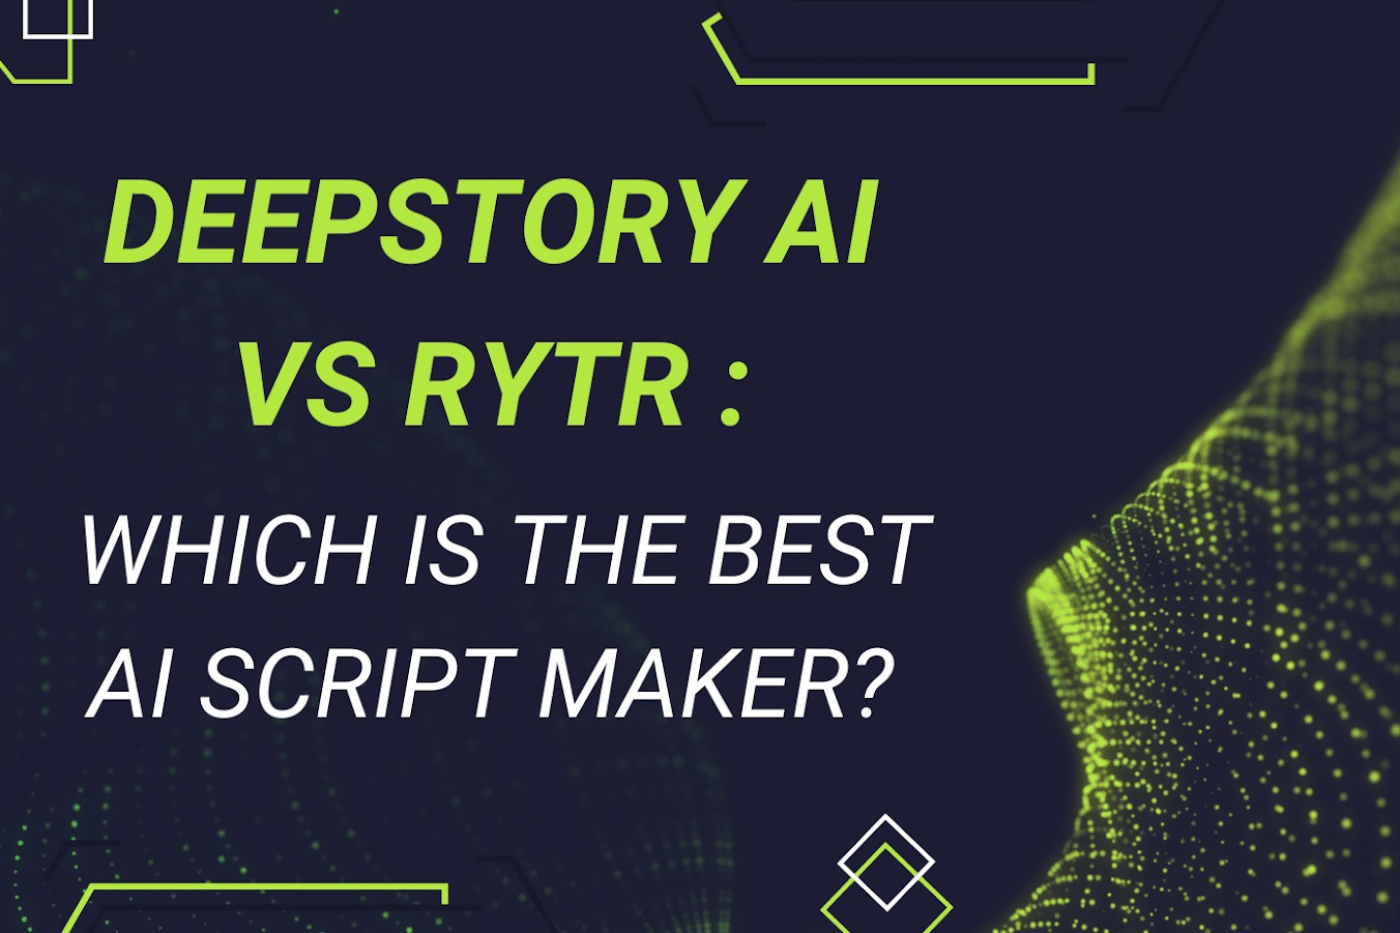 Deepstory AI VS RYTR which is best